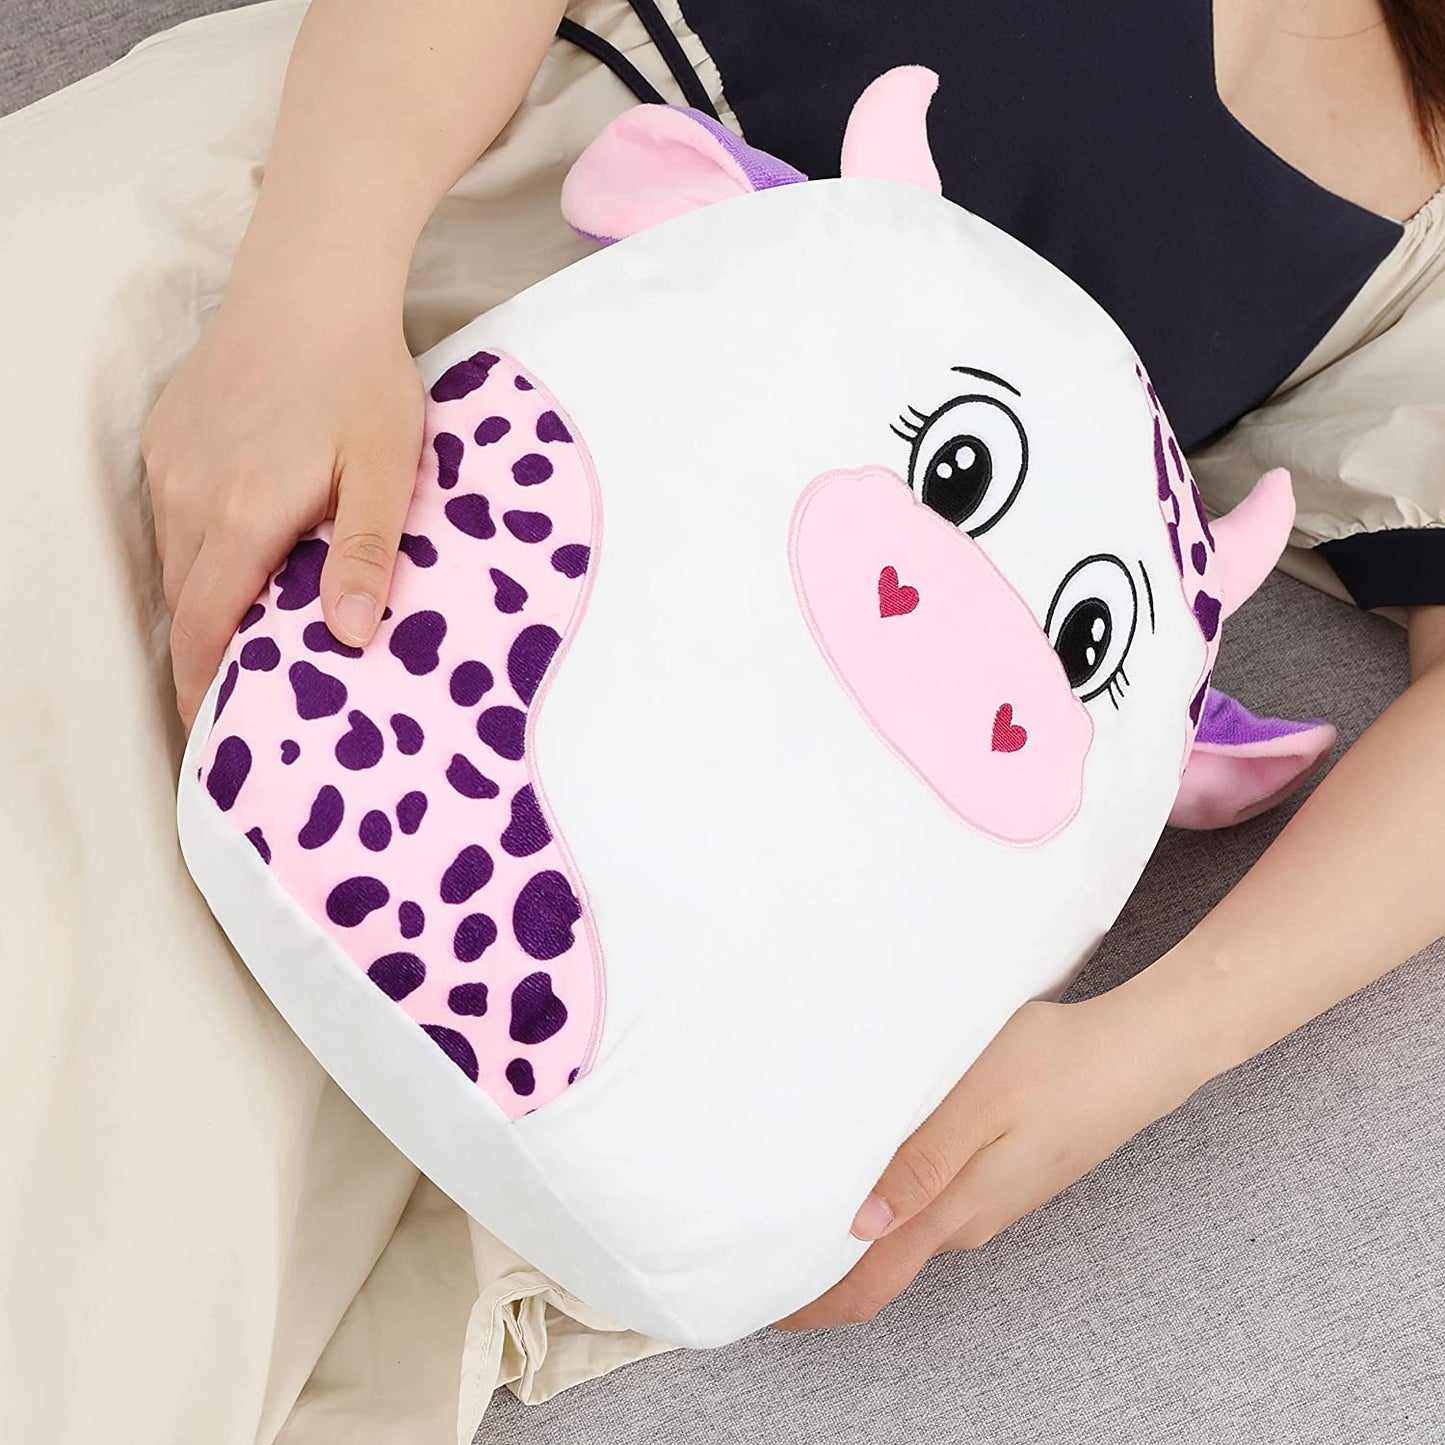 Cow Plush Toy Cattle Throw Pillow, 16/20 Inches - MorisMos Stuffed Animals - Free Shipping